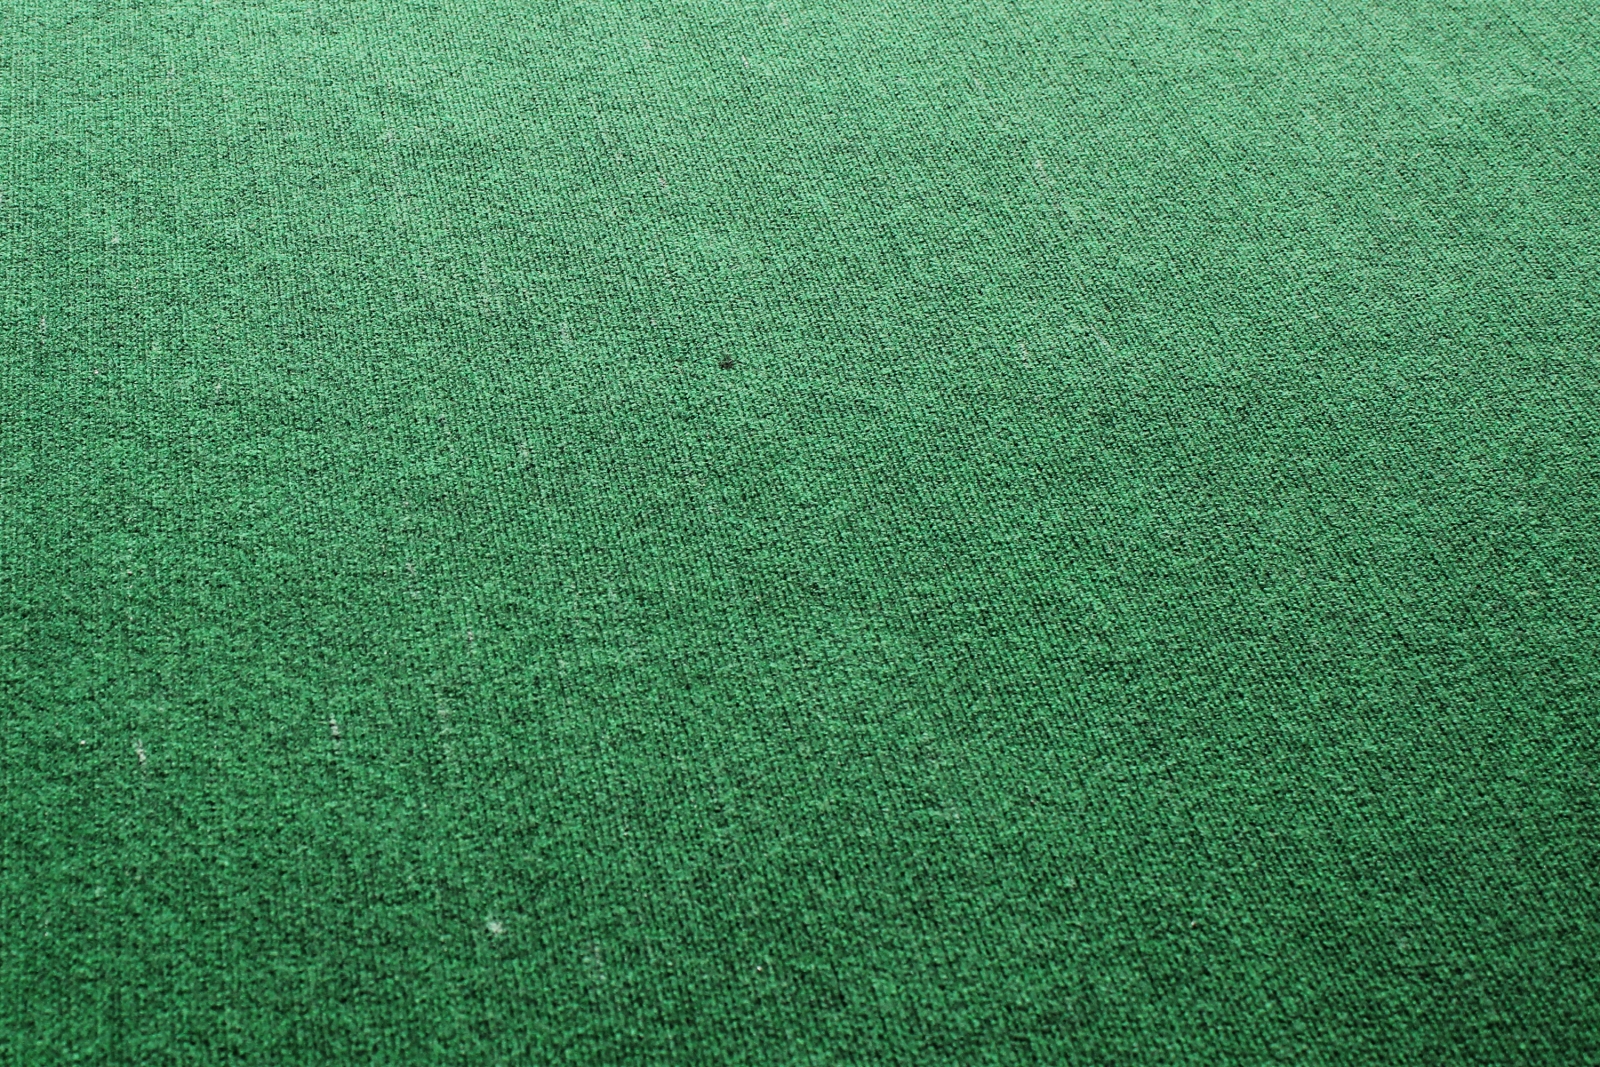 Synthetic Sports Carpet Background Links Image